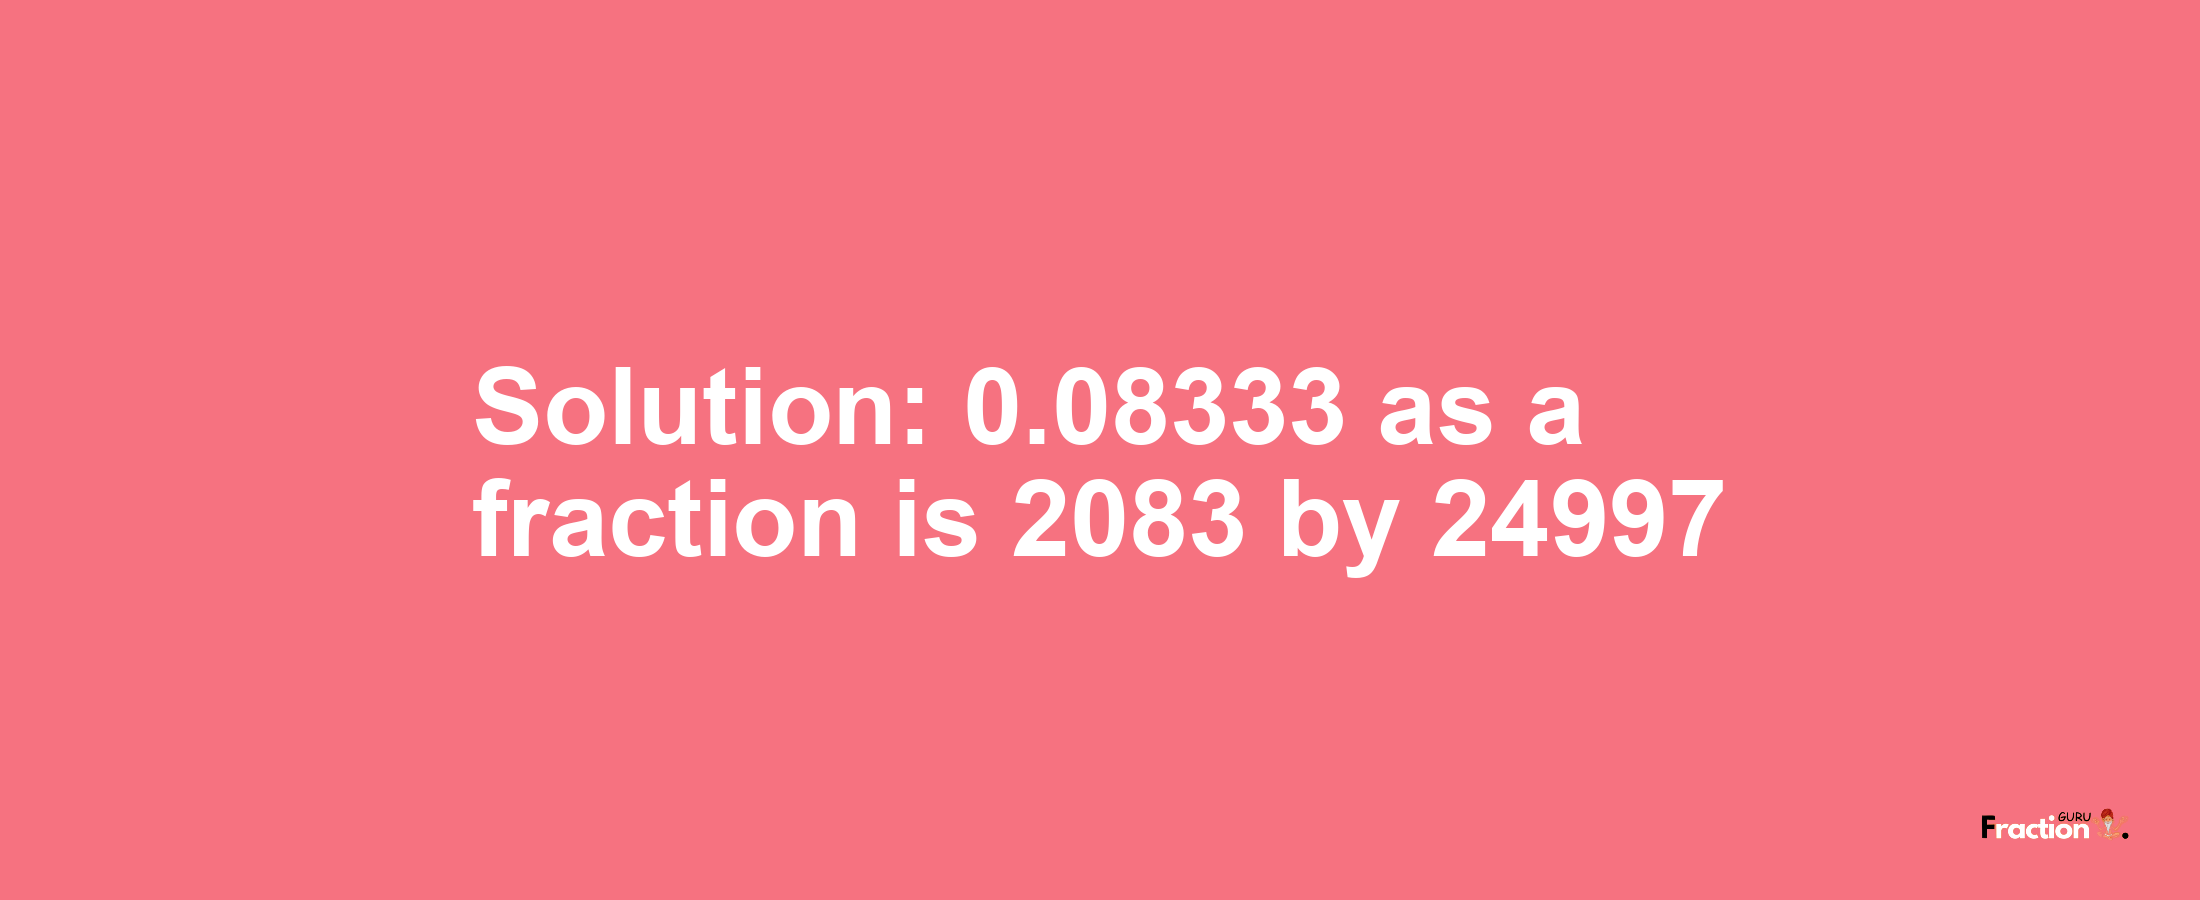 Solution:0.08333 as a fraction is 2083/24997